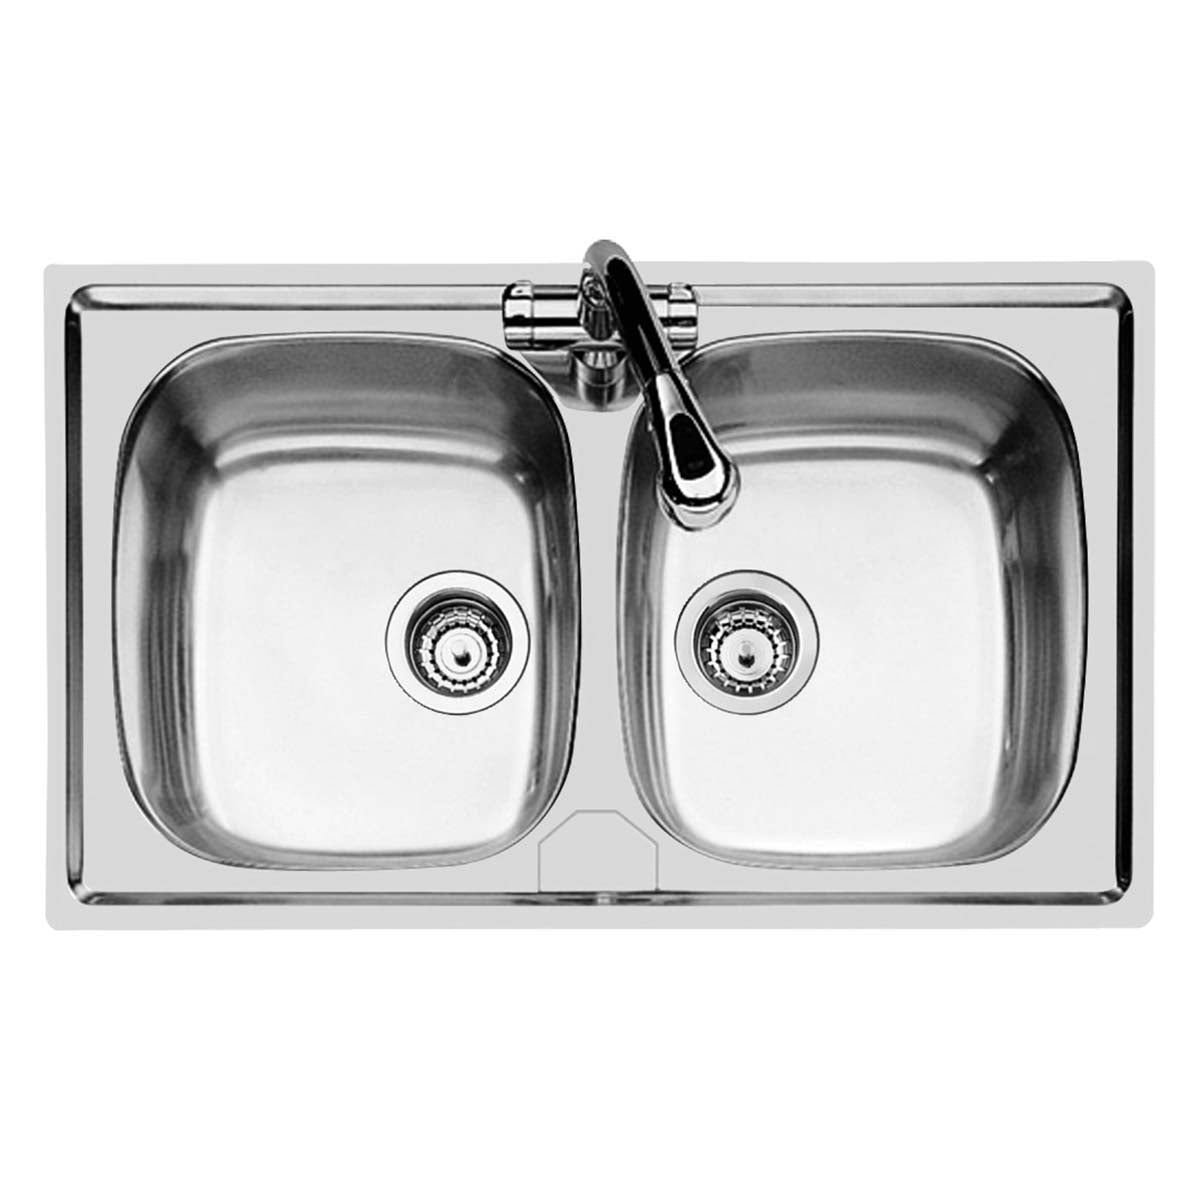 Foster S1000 Double Bowl Kitchen Sink Brushed Stainless Steel